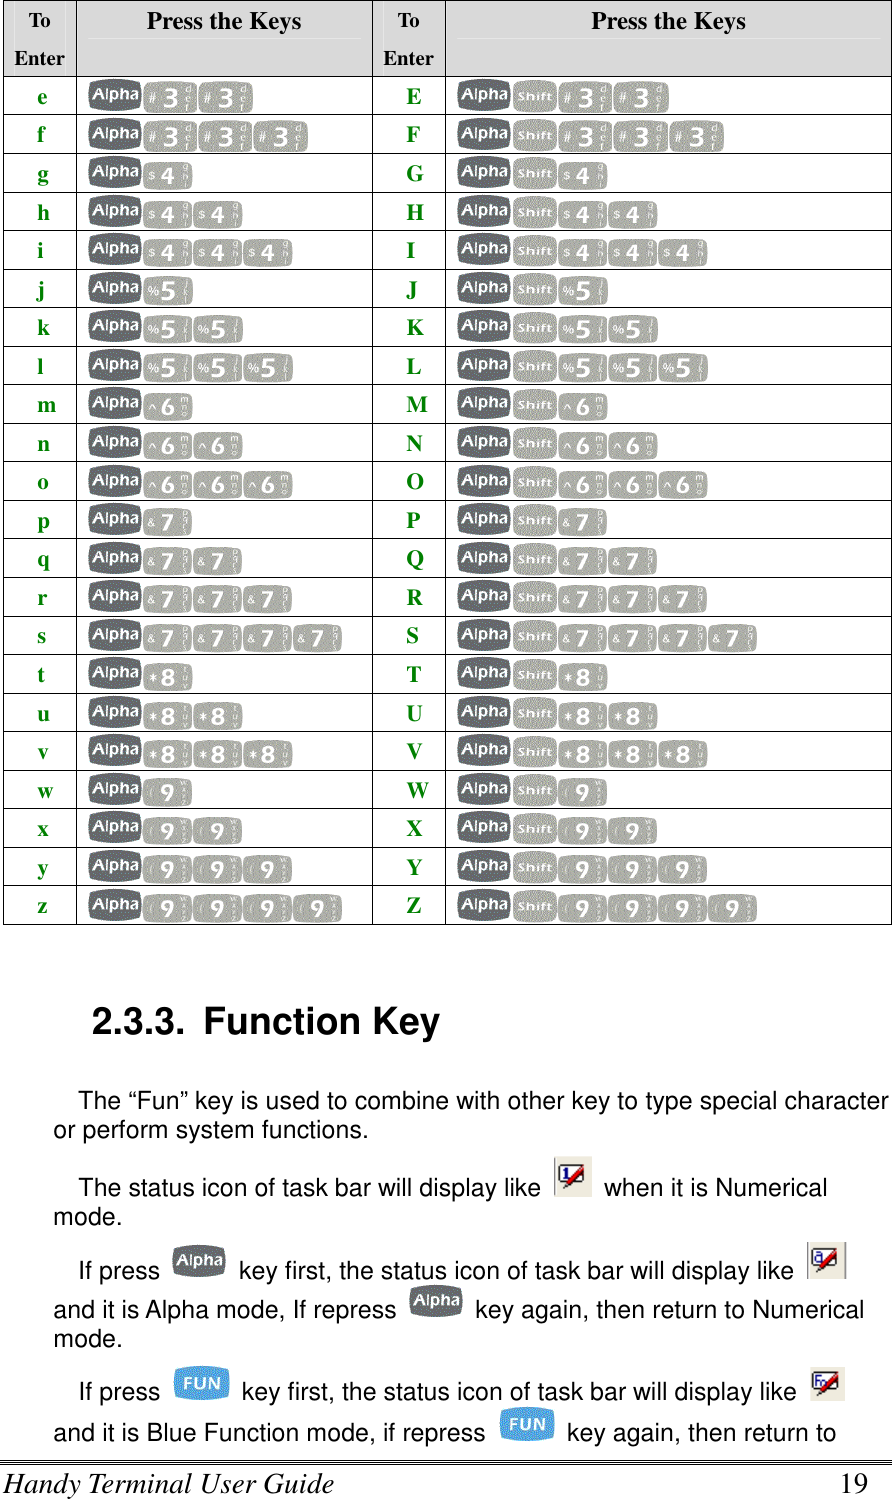 Handy Terminal User Guide      19 To Enter Press the Keys To Enter Press the Keys     e      E      f      F      g      G      h      H      i      I      j      J      k      K      l      L      m    M      n      N      o      O      p      P      q      Q      r      R      s      S      t      T      u      U      v      V      w    W      x      X      y      Y      z      Z    2.3.3.  Function Key The “Fun” key is used to combine with other key to type special character or perform system functions. The status icon of task bar will display like    when it is Numerical mode. If press    key first, the status icon of task bar will display like   and it is Alpha mode, If repress    key again, then return to Numerical mode. If press    key first, the status icon of task bar will display like   and it is Blue Function mode, if repress    key again, then return to 